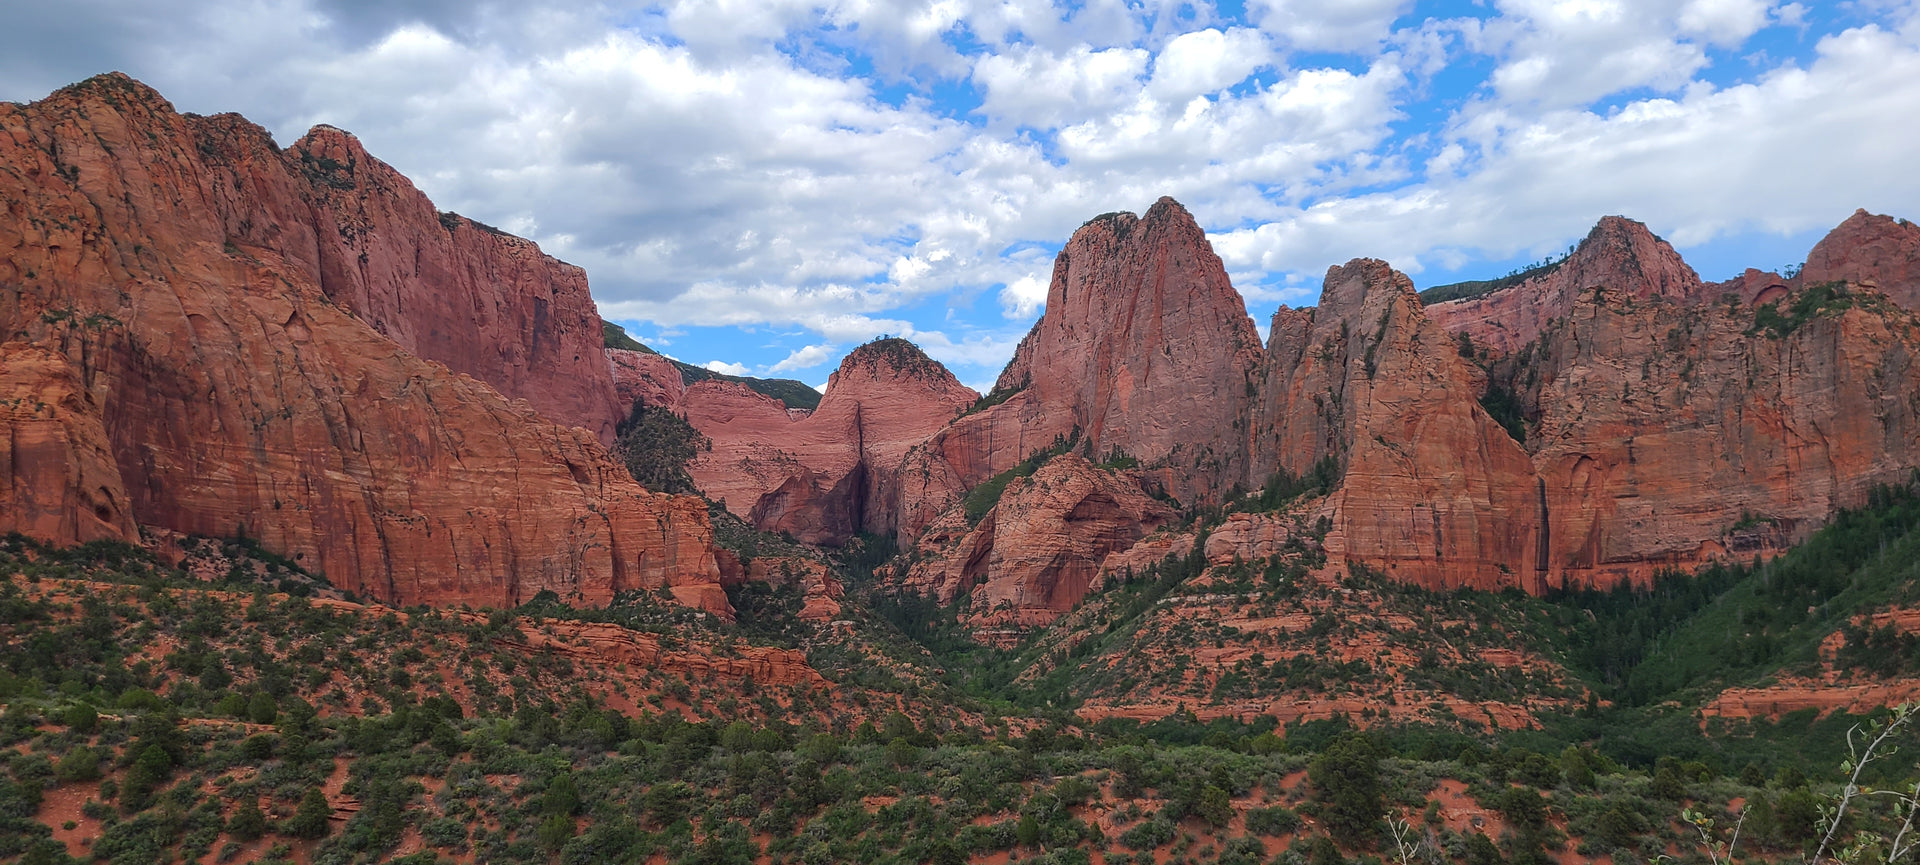 Red Rock faces in Kolob Canyon - Crosscountrycreations